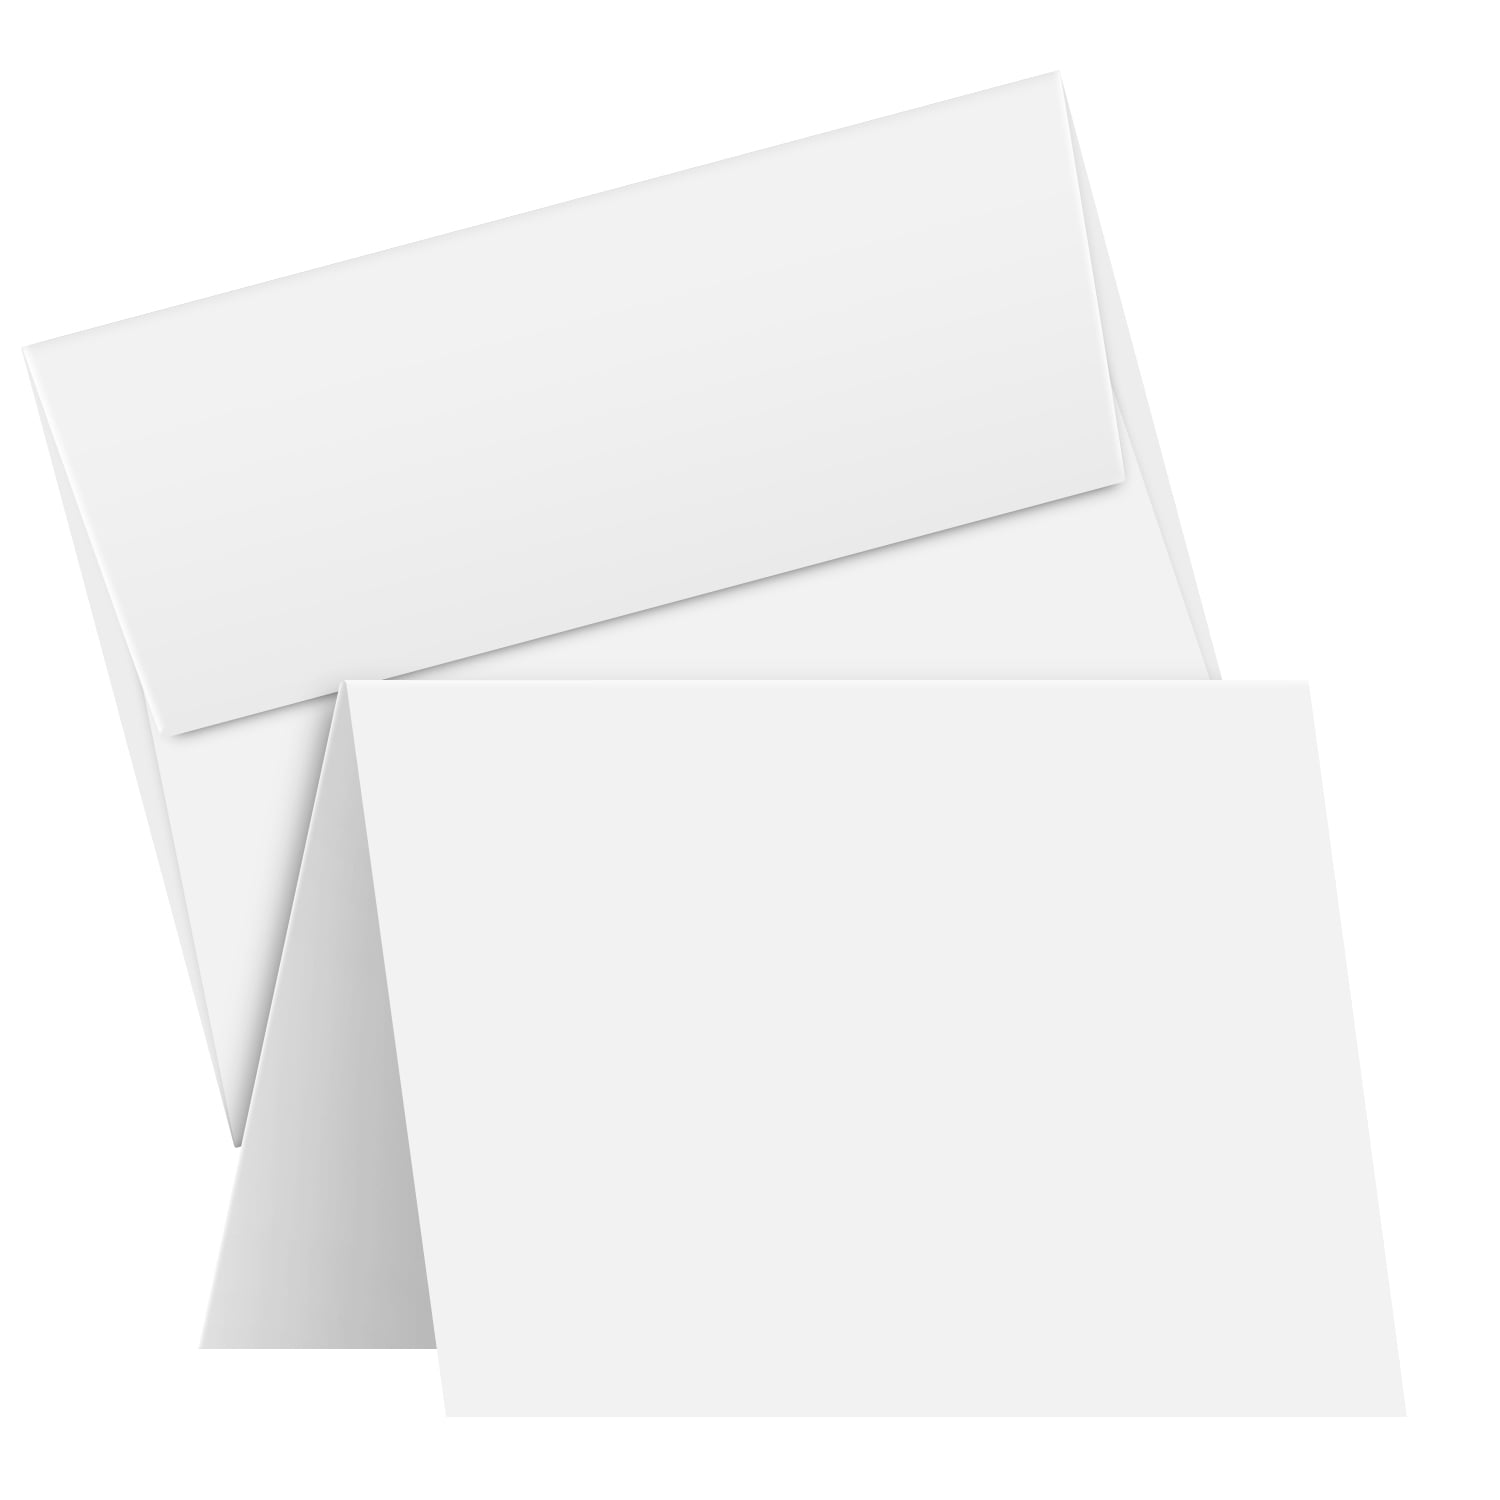 100 Blank White Greeting Cards Set – A2 (4.25 x 5.5) Cardstock